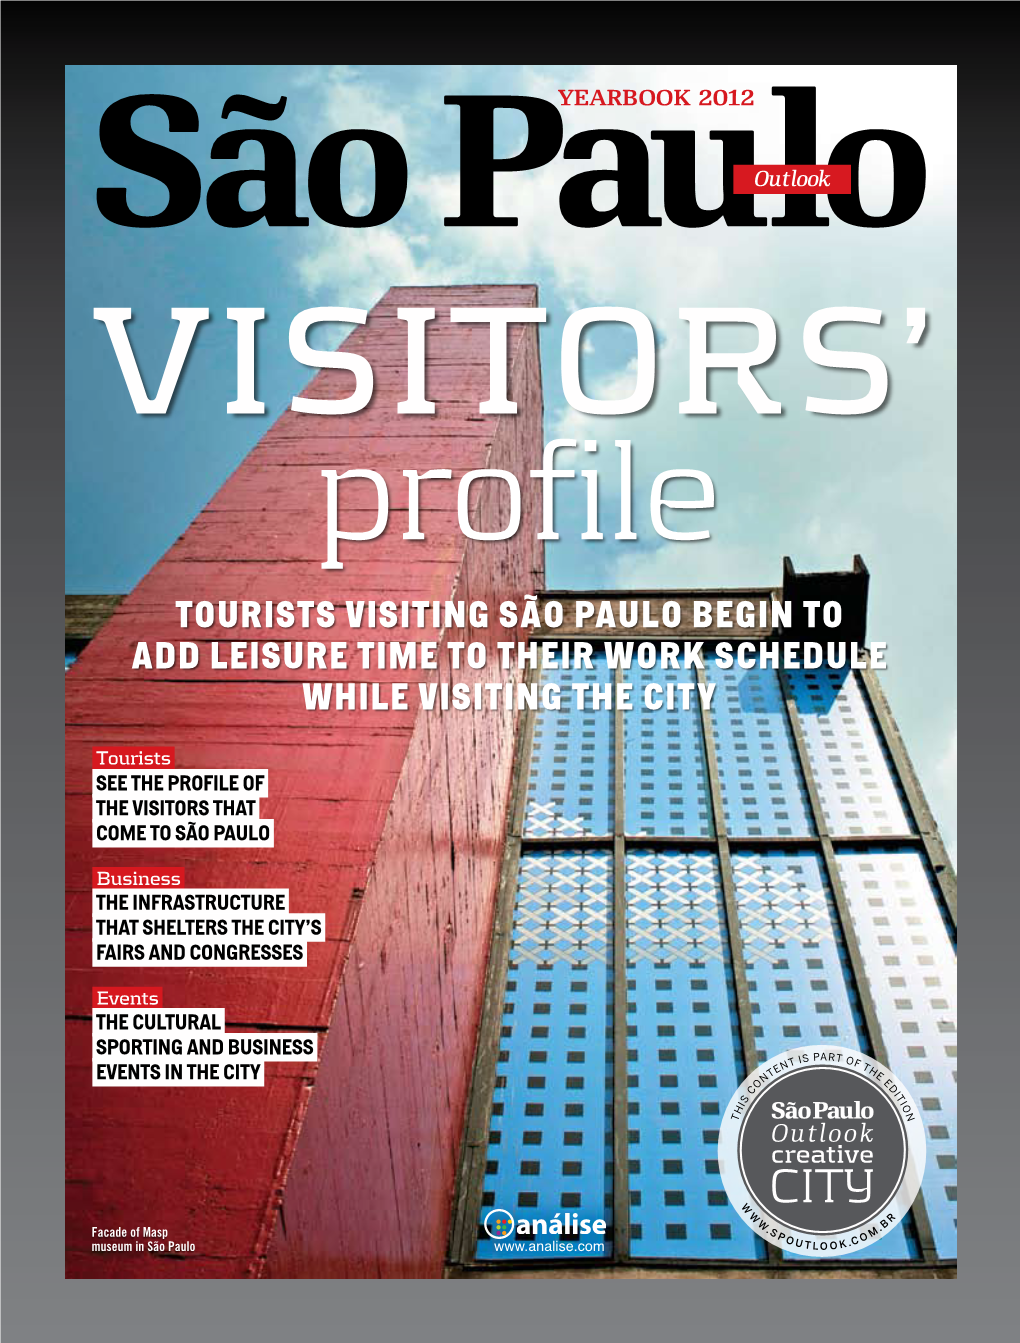 Tourists Visiting São Paulo Begin to Add Leisure Time to Their Work Schedule While Visiting the City